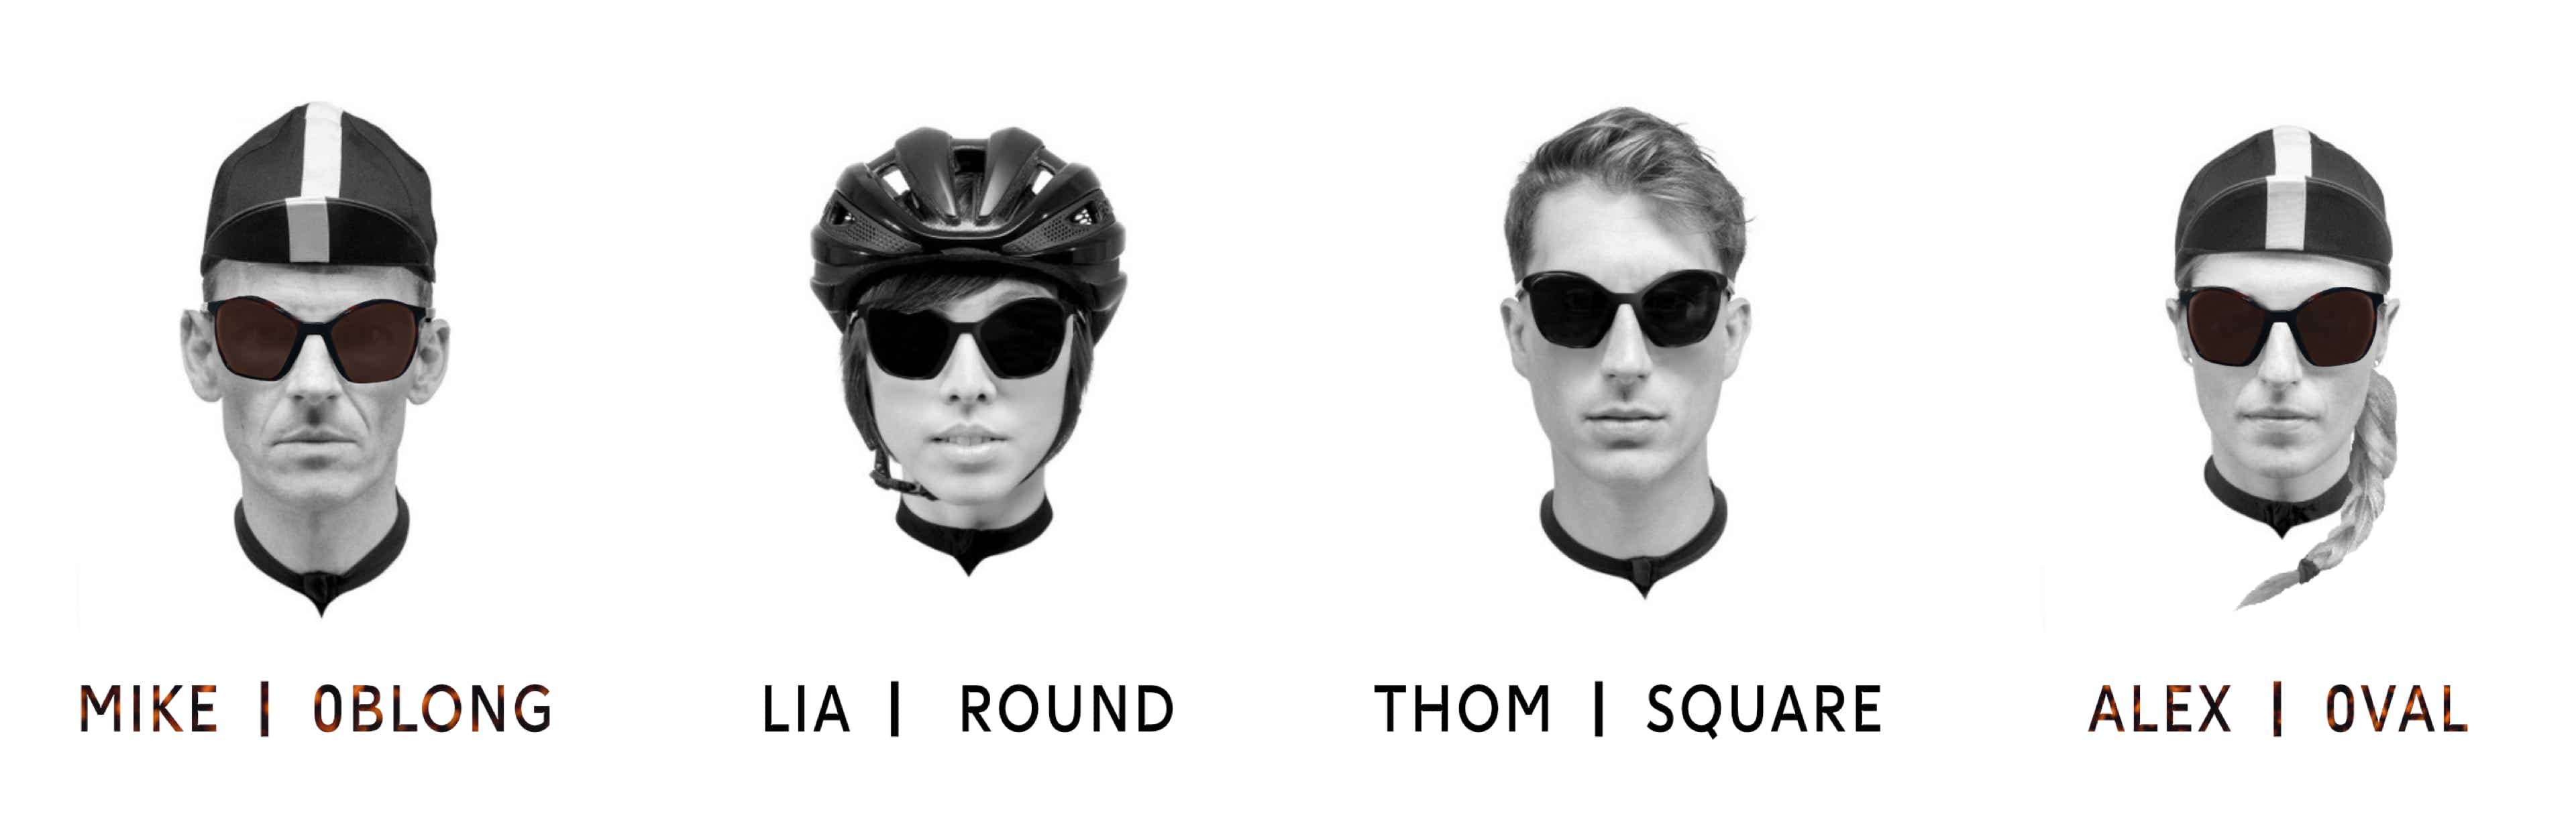 classic sunglasses for cycling